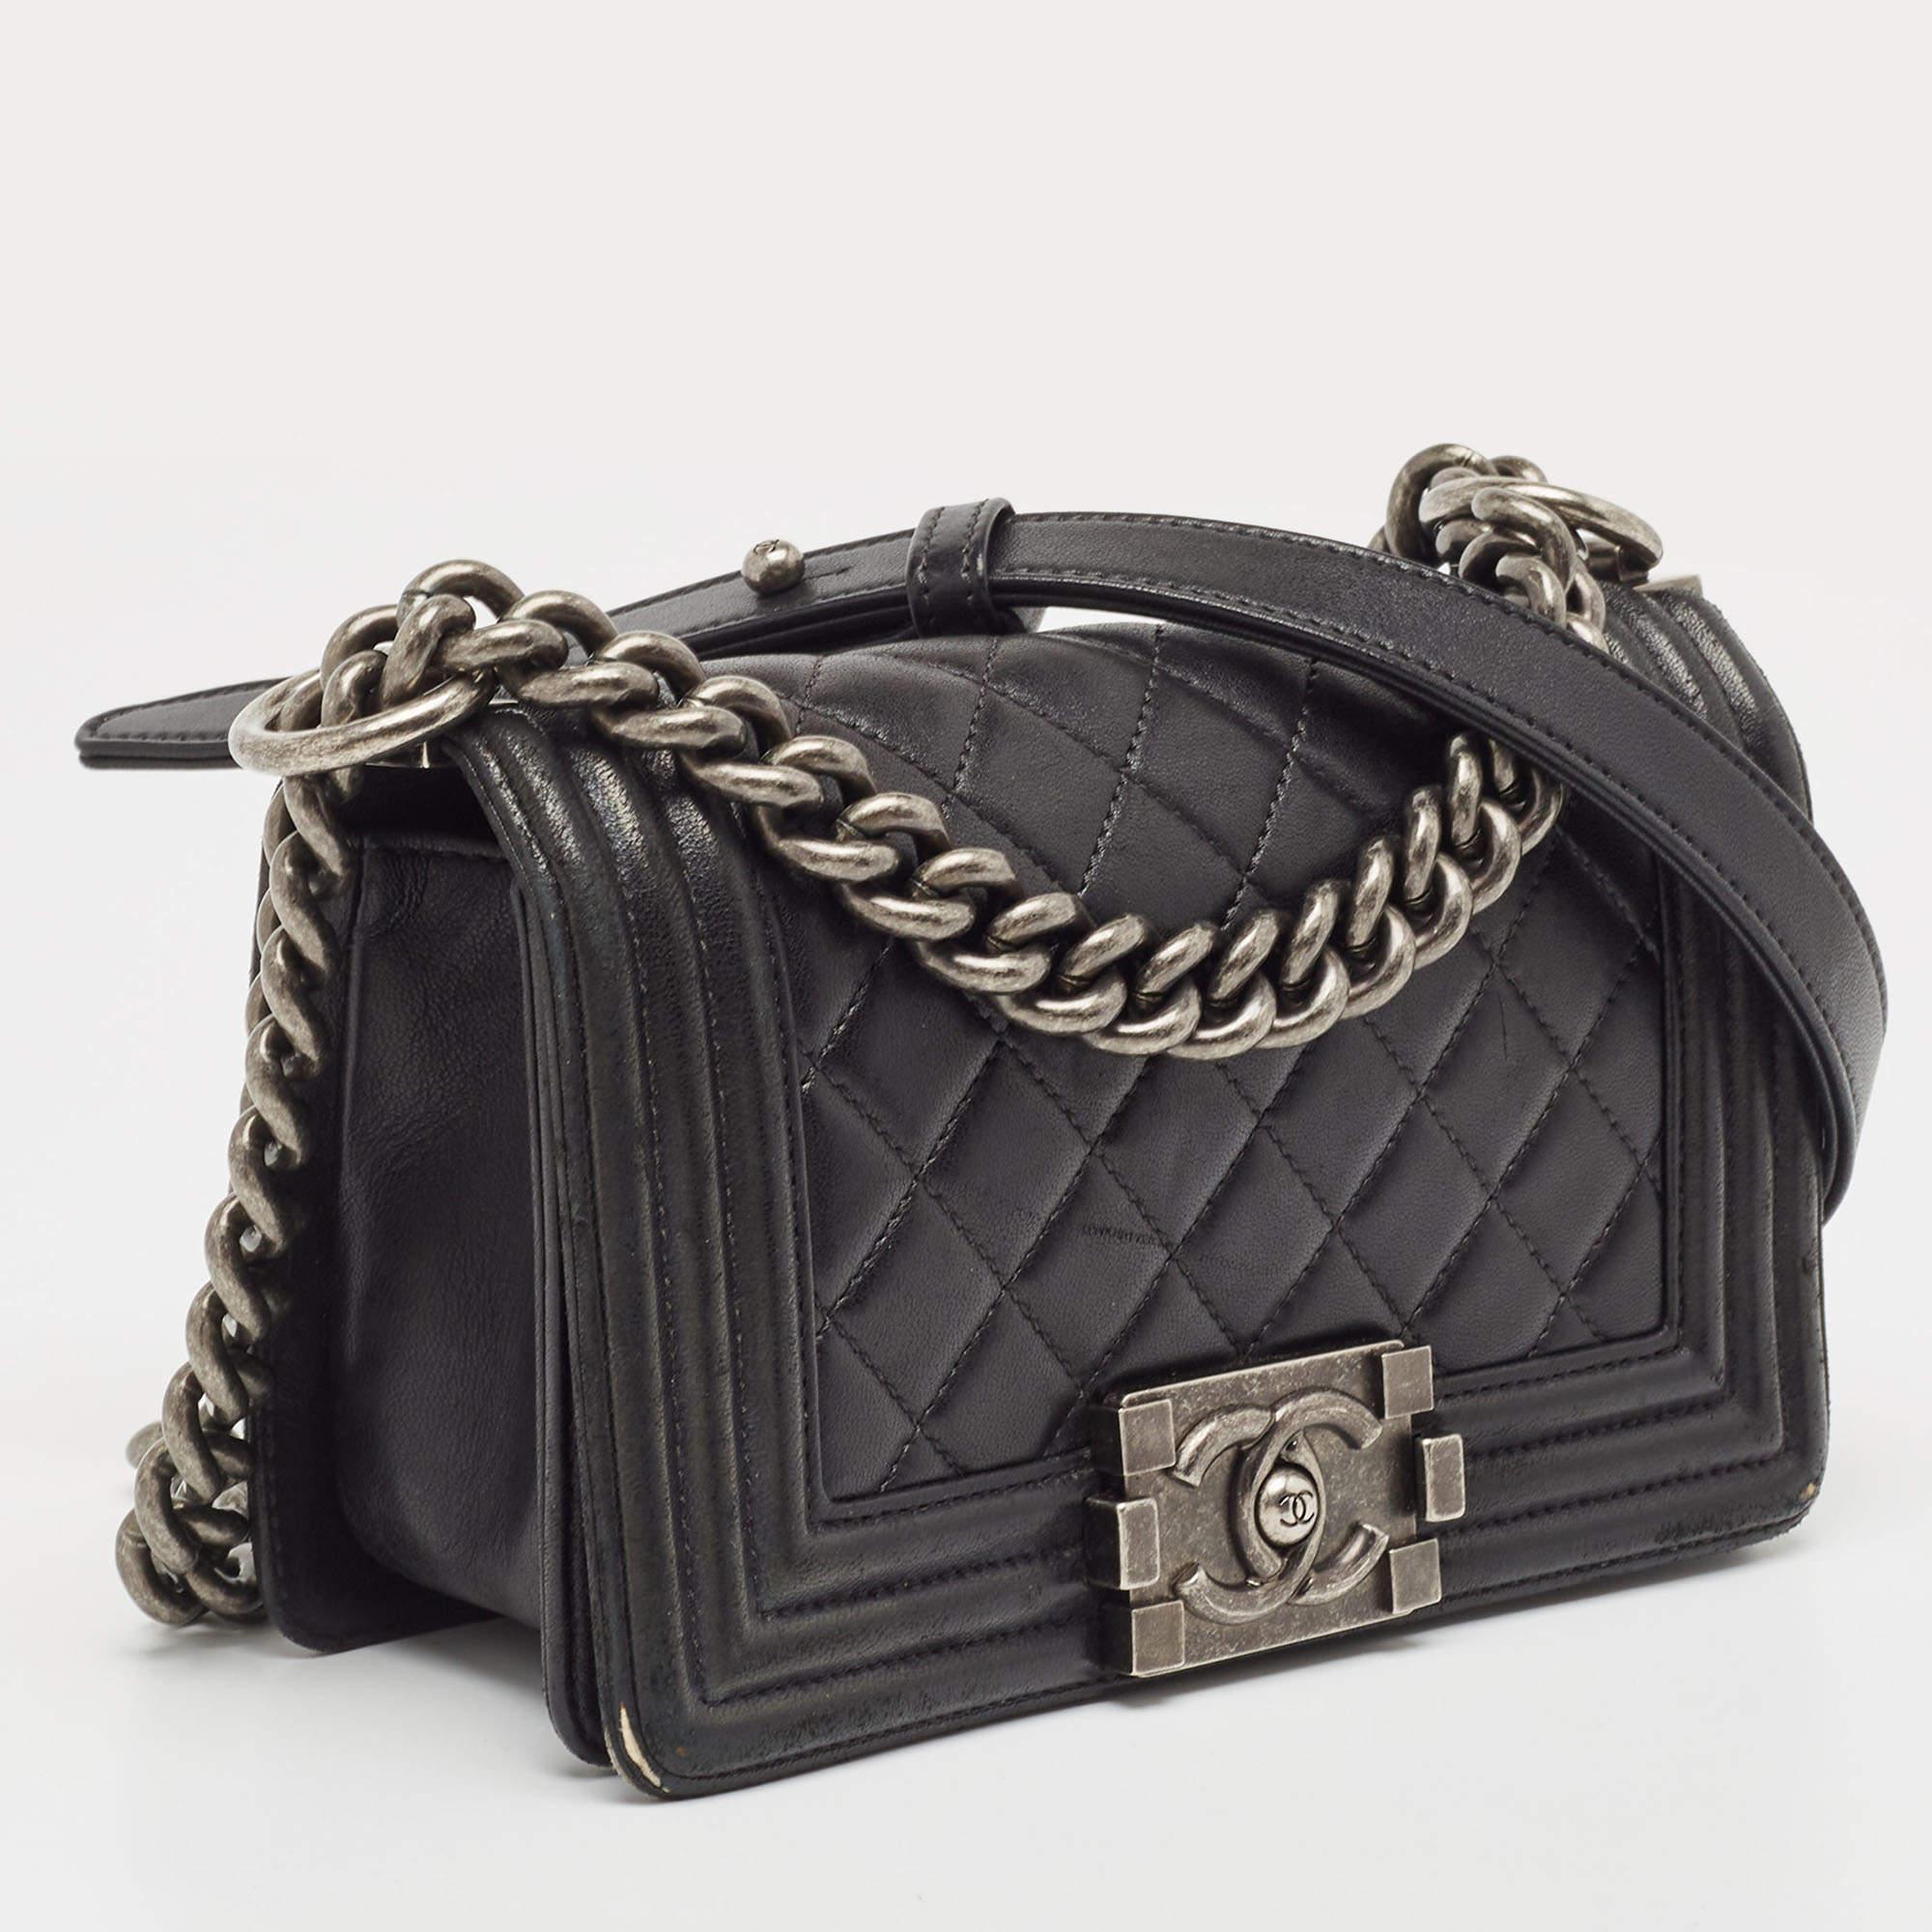 Ensure your day's essentials are in order and your outfit is complete with this Chanel Boy flap bag. Crafted using the best materials, the bag carries the maison's signature of artful craftsmanship and enduring appeal.

